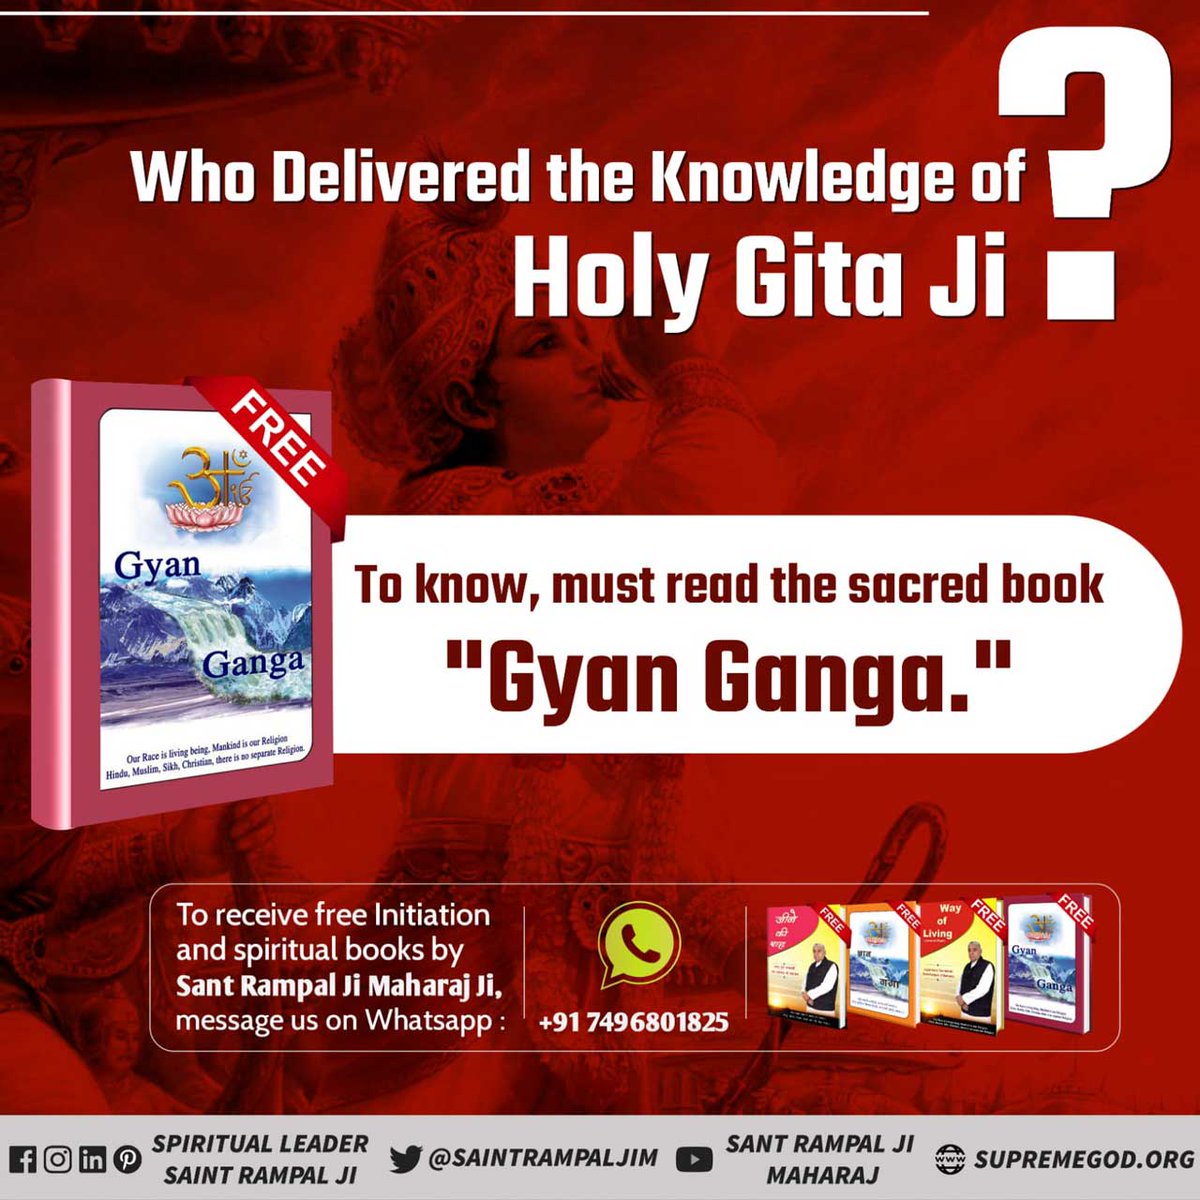 #GodNightWednesday
Who Delivered the
Knowledge of Holy Gita Ji ?
For More Information, must read the previous book 'Gyan Ganga''
#wednesdaythought